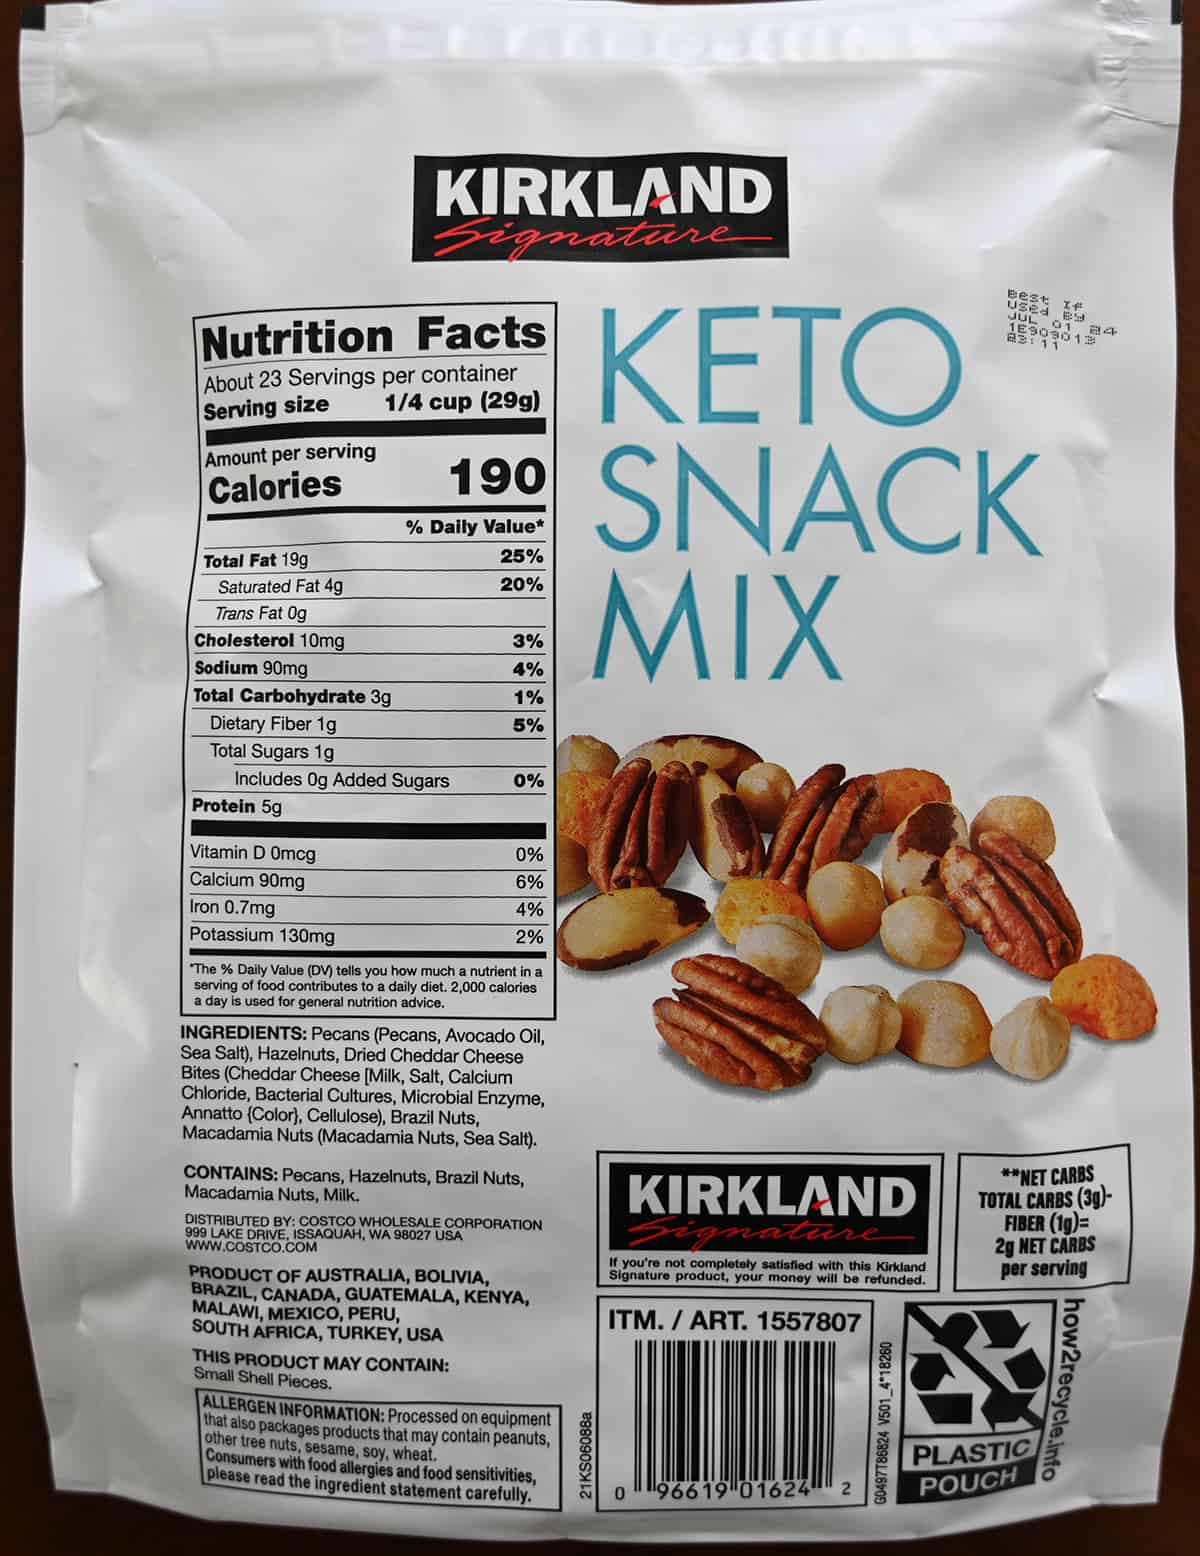 Image of the back of the bag of the keto snack mix showing ingredients, nutrition facts and where the product is produced.